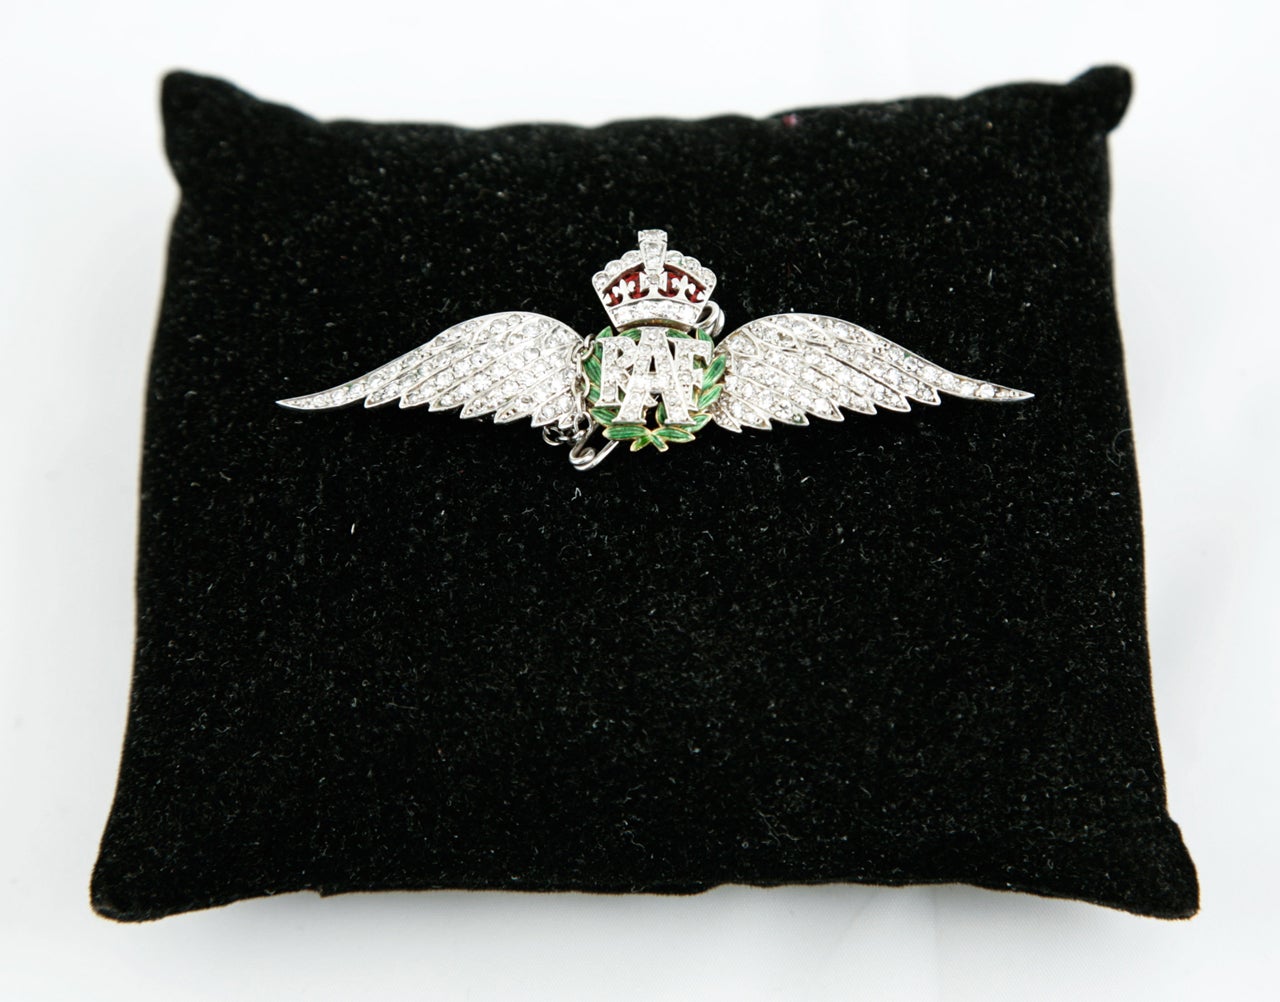 Platinum and yellow gold Royal Air Force brooch set diamonds and enamel,signed Cartier,c,1937